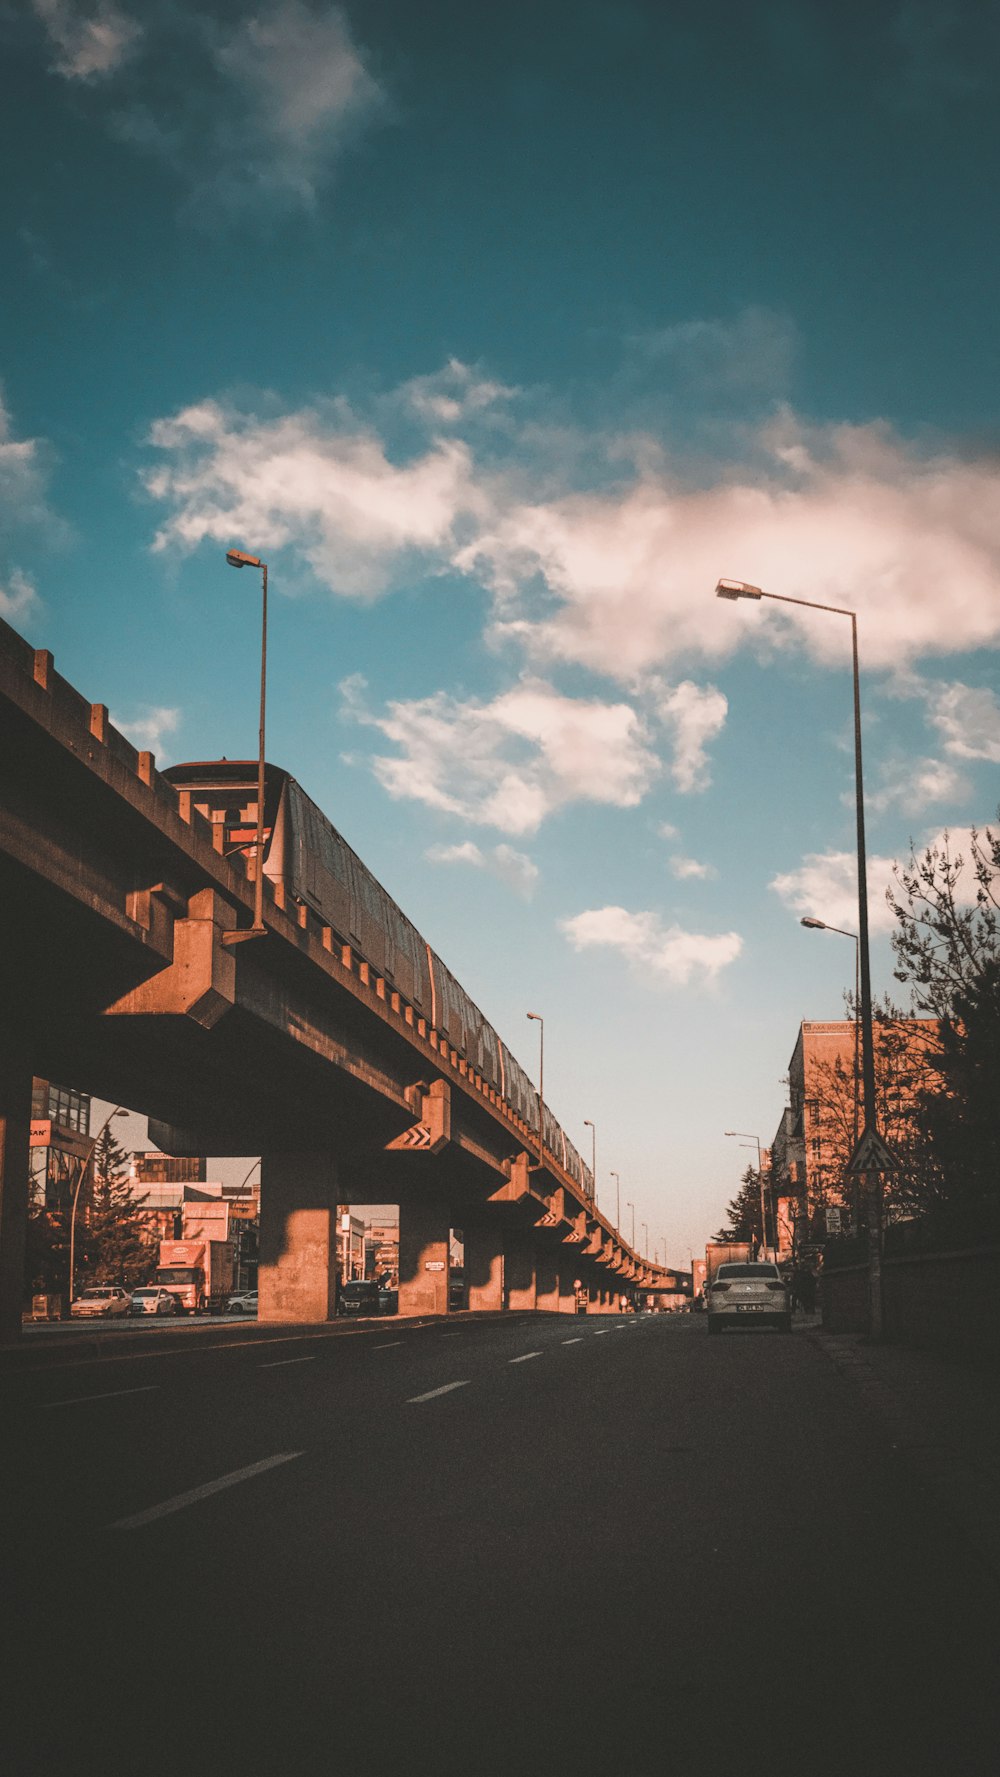 a view of a highway with a bridge in the background